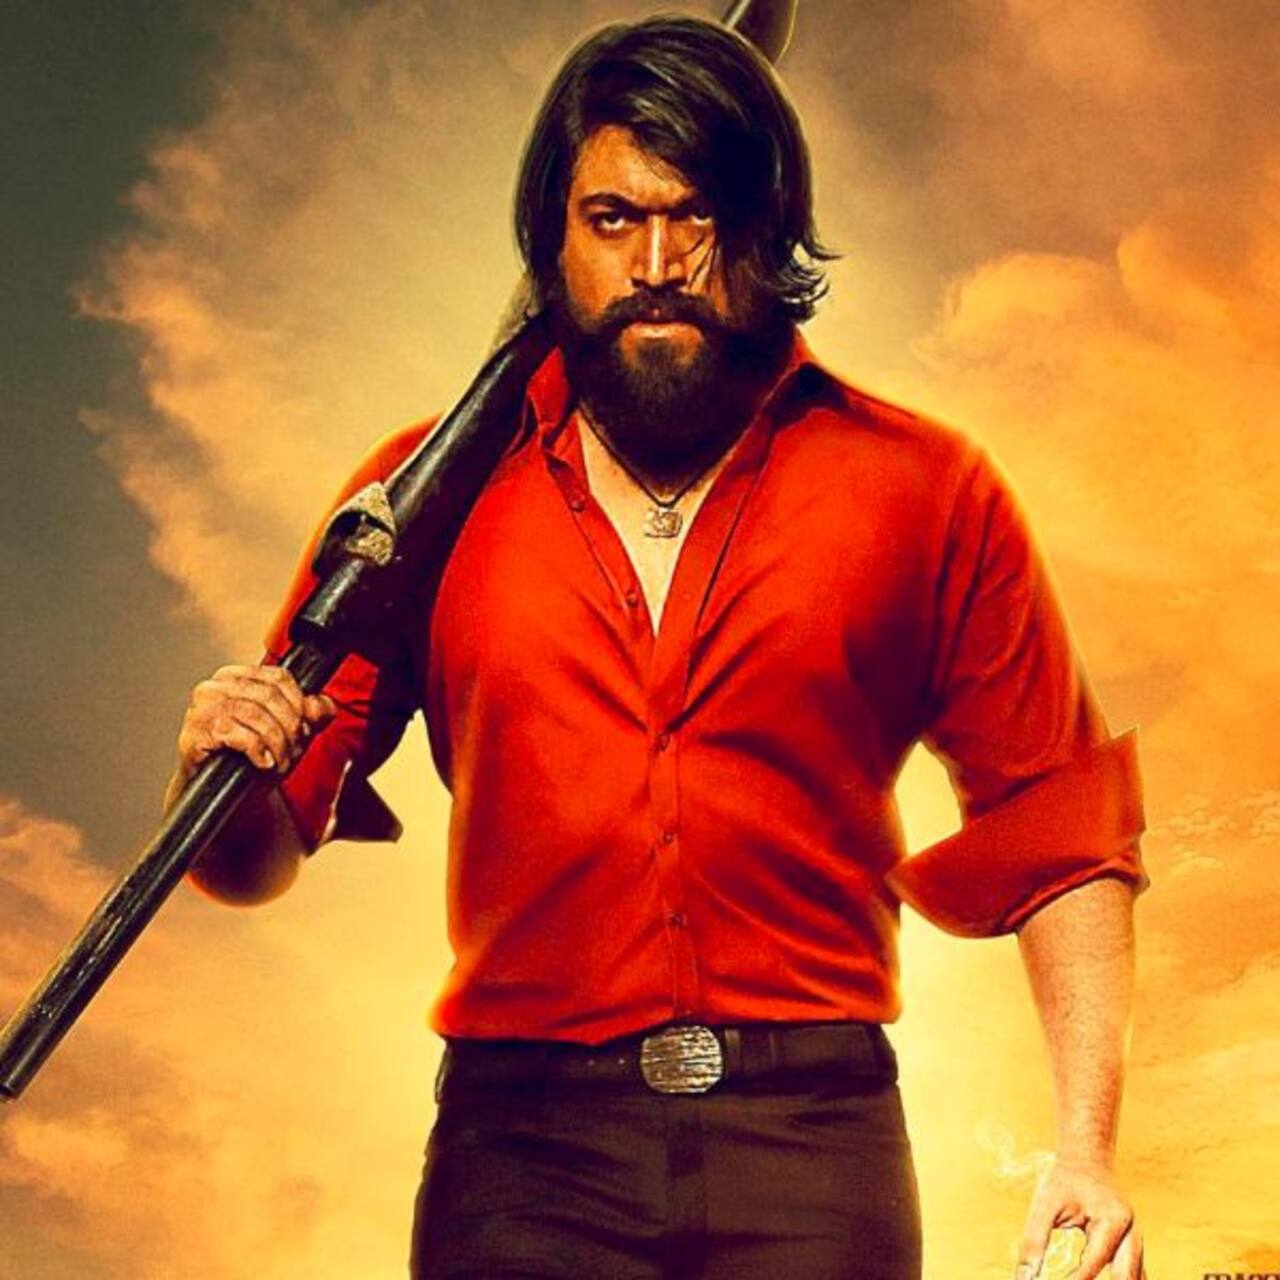 KGF 2: It’s official! The Yash and Sanjay Dutt starrer will release on THIS date